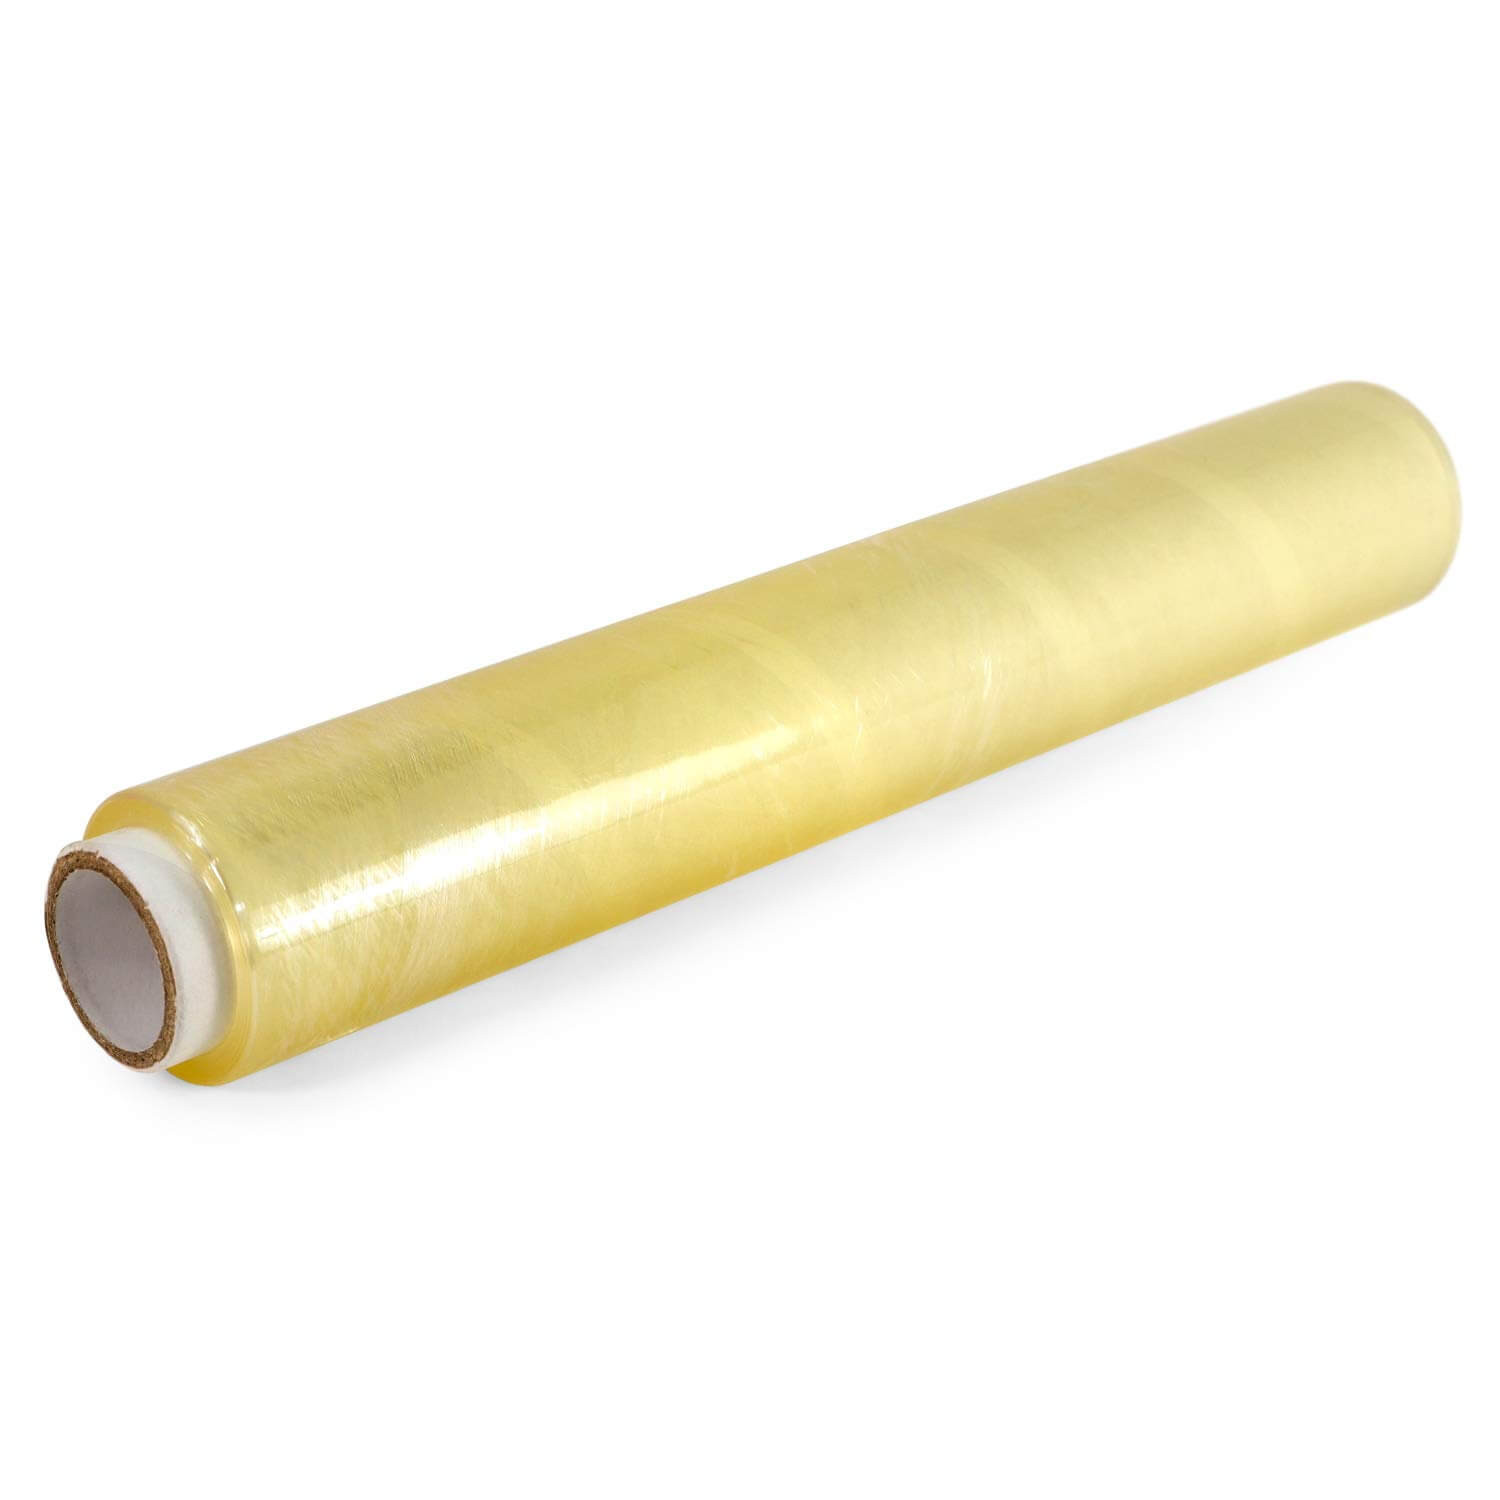 https://idlpack.com/image/cache/catalog/Products/Food-Film/Champagne-Color/IDL-Packaging-12-250-Strong-PVC-Cling-Food-Film-Wrap-Refill-Roll-Champagne-Color-1500x1500.jpg